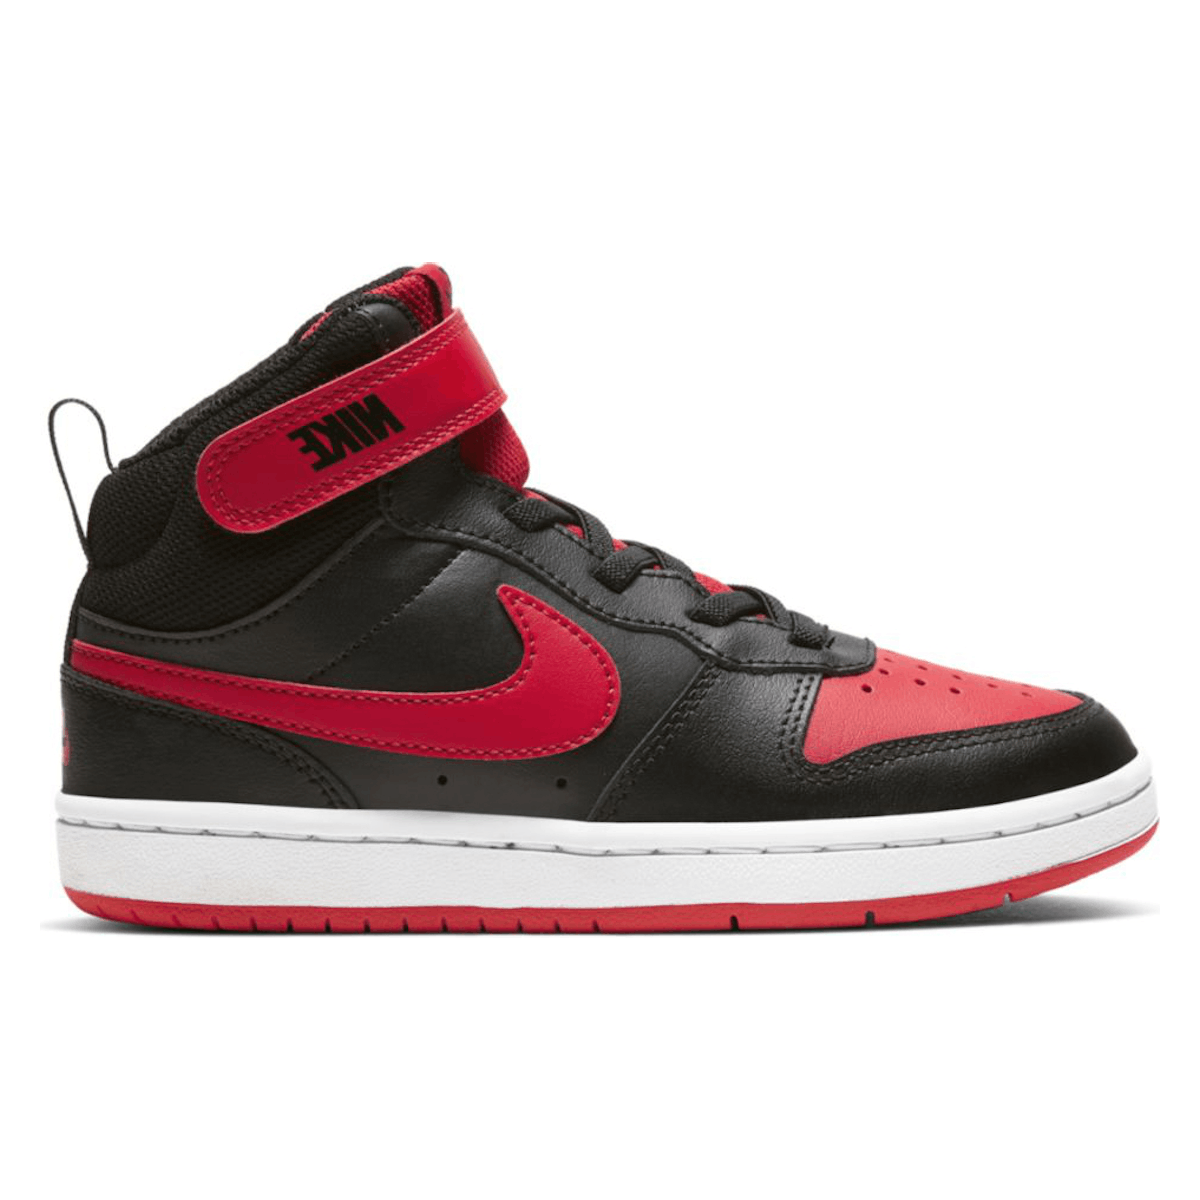 Nike Court Borough Mid 2 Bred (PS)